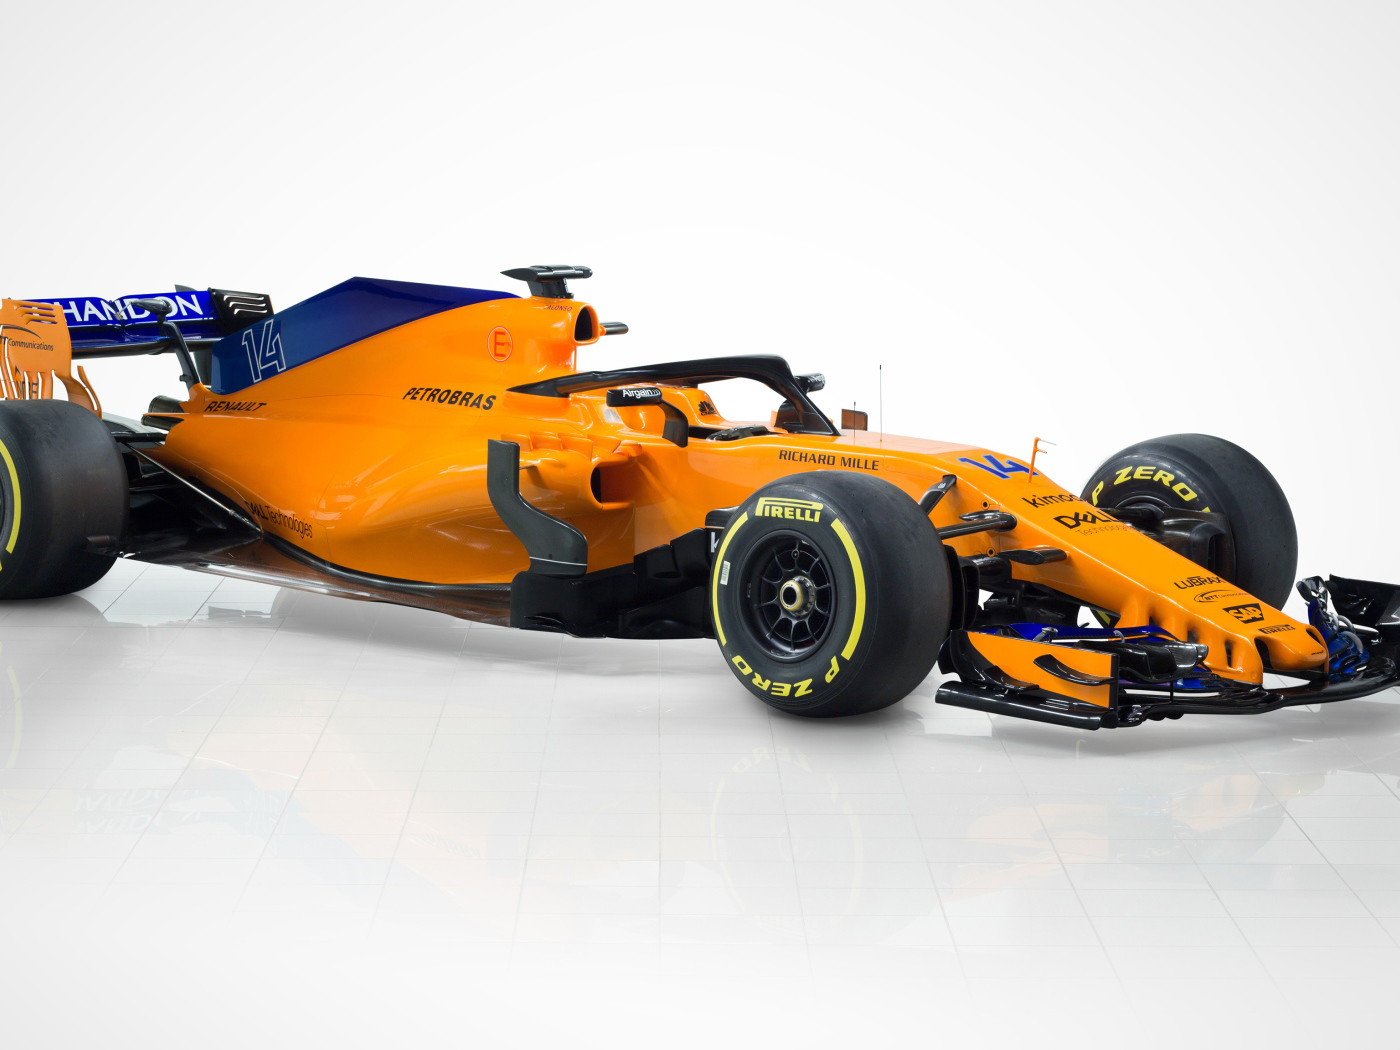 Racing car McLaren MCL33 F1, 2018 on a gray background